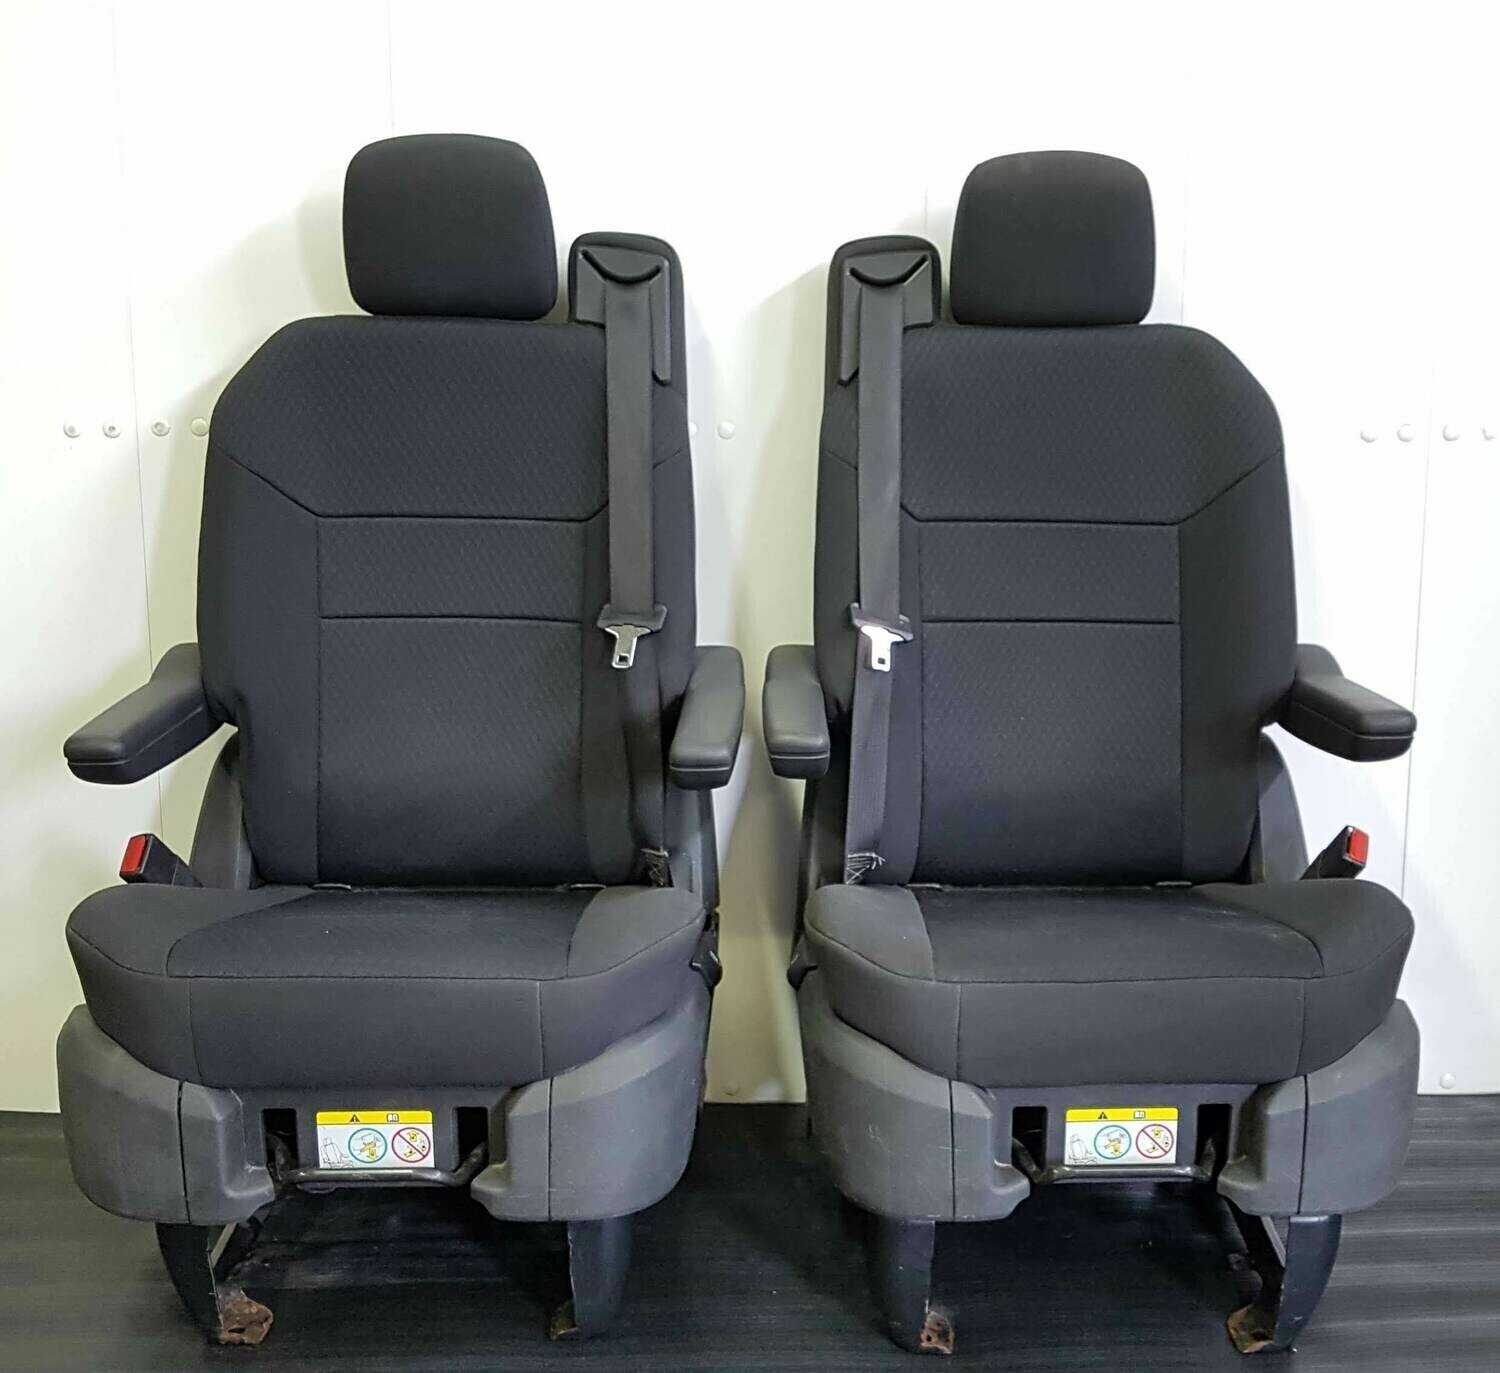 Pair of Swivel Seats for RVs